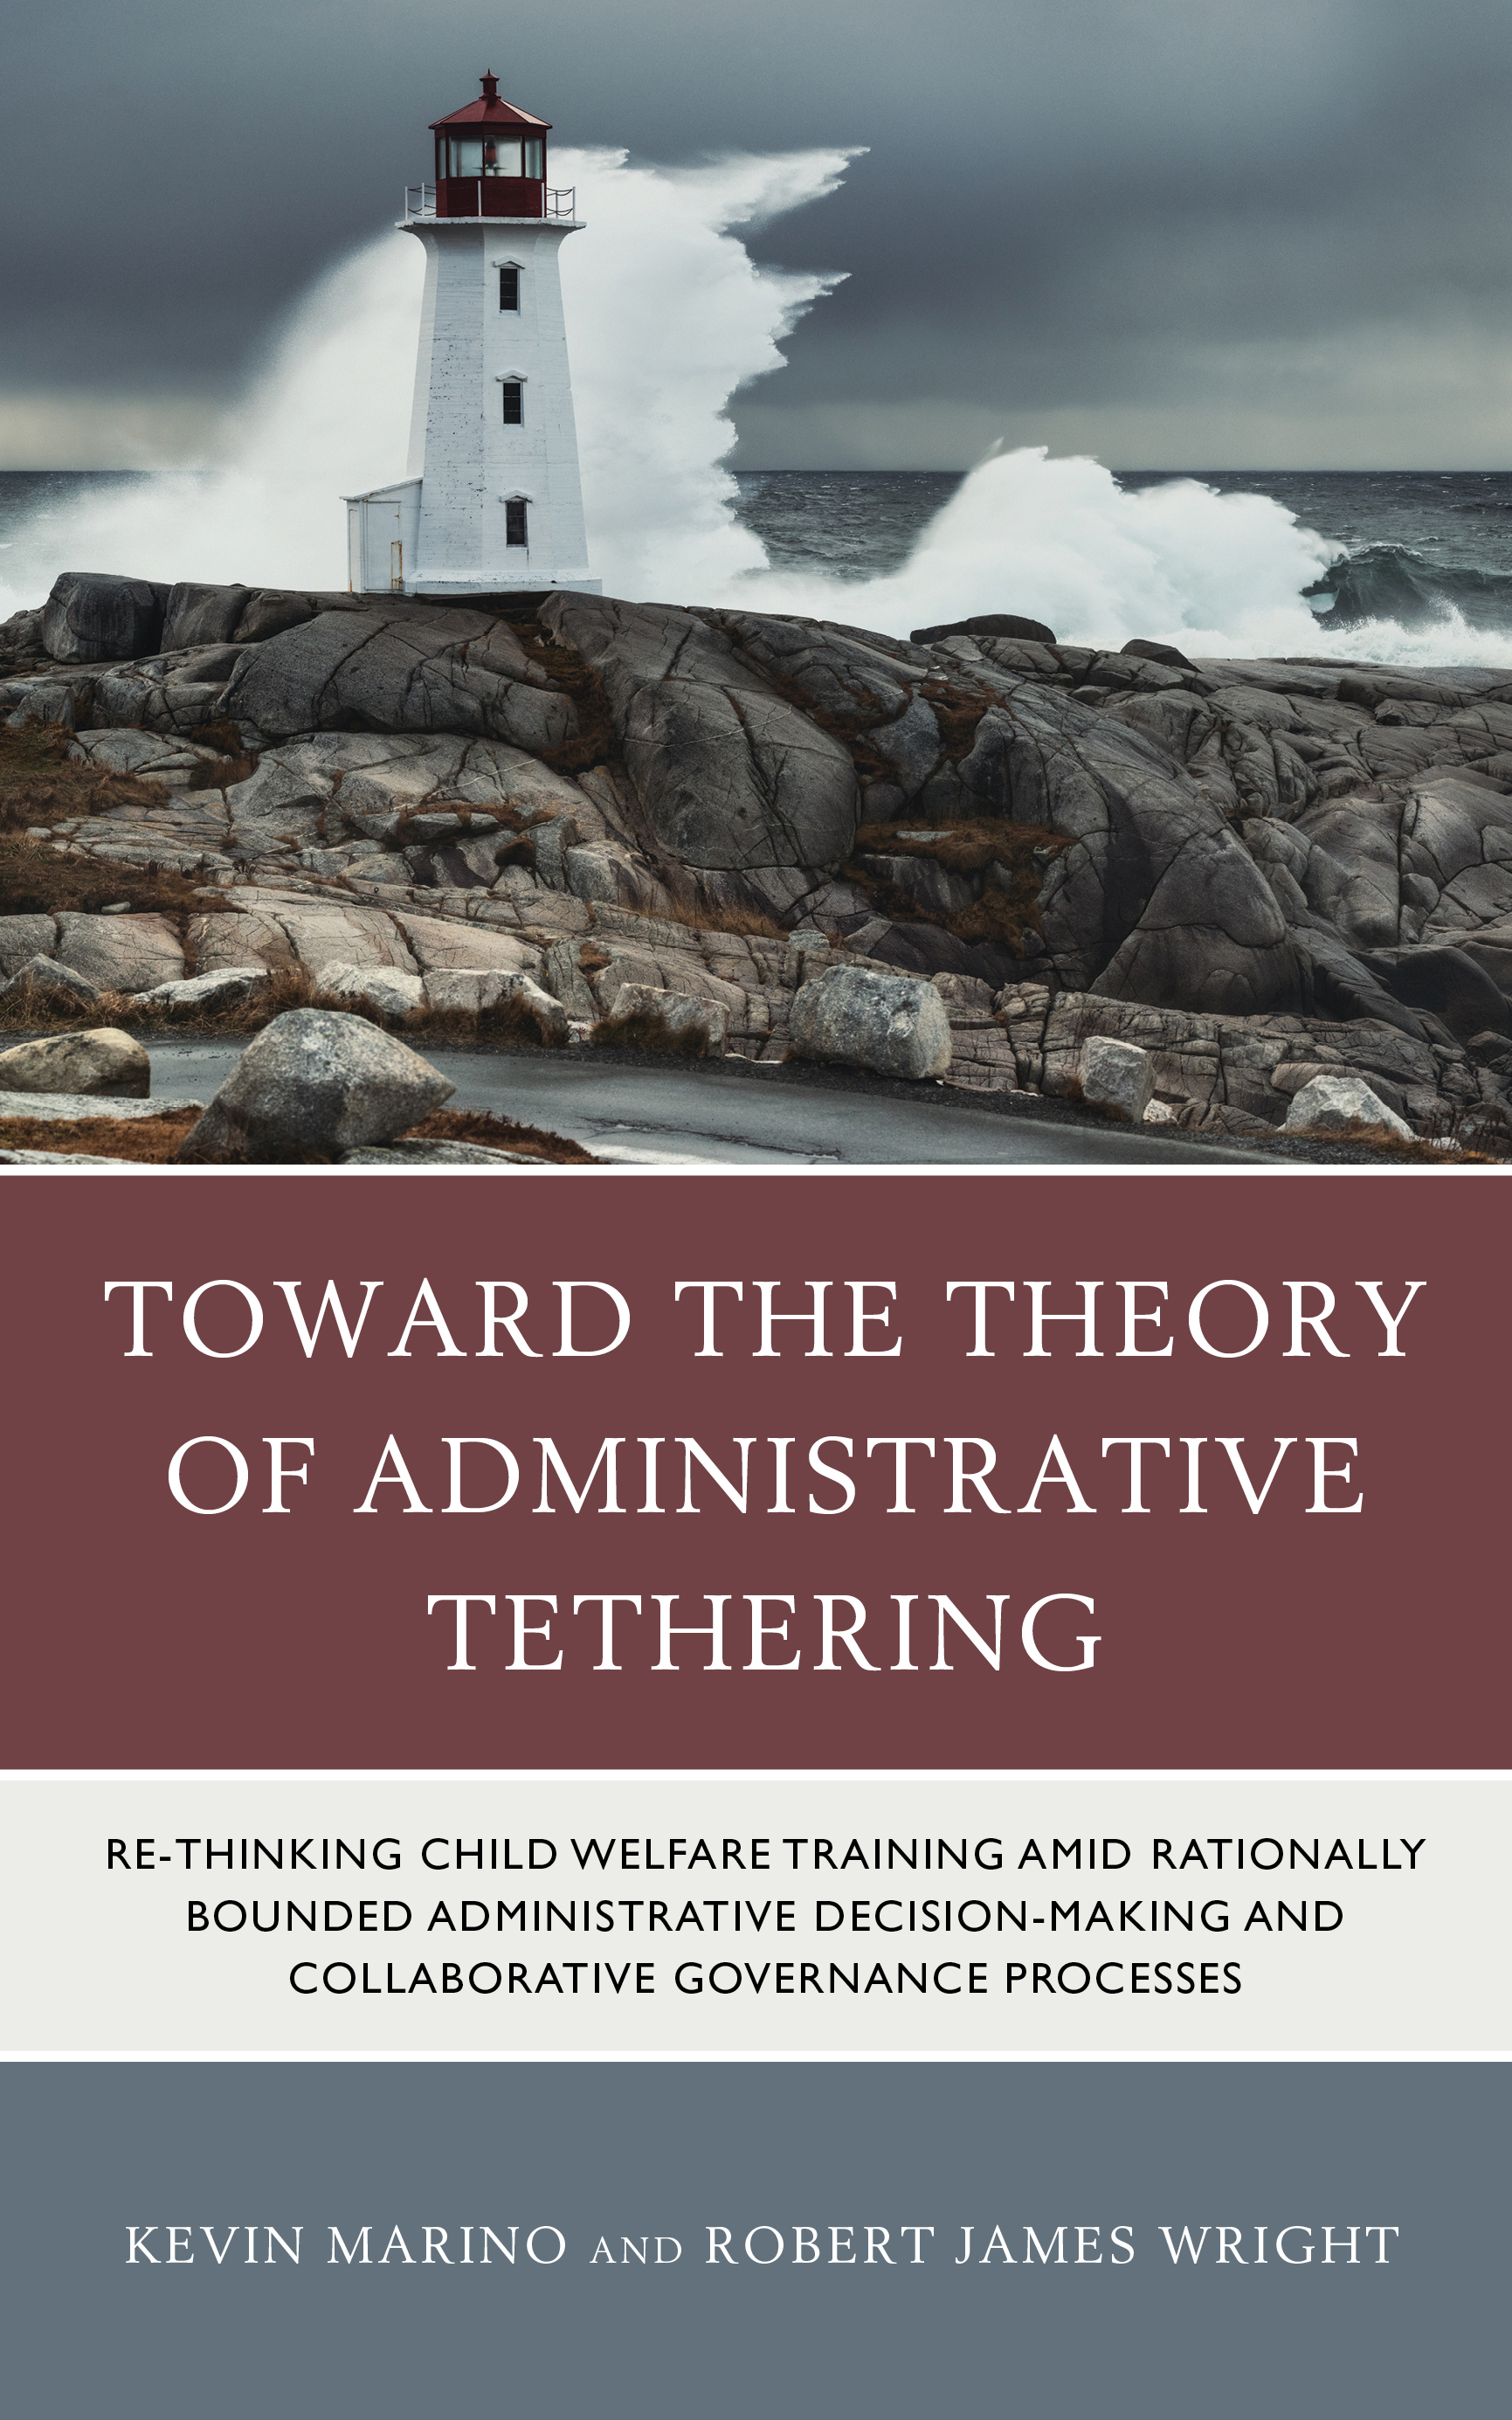 Toward the Theory of Administrative Tethering: Re-thinking Child Welfare Training amid Rationally Bounded Administrative Decision-Making and Collaborative Governance Processes